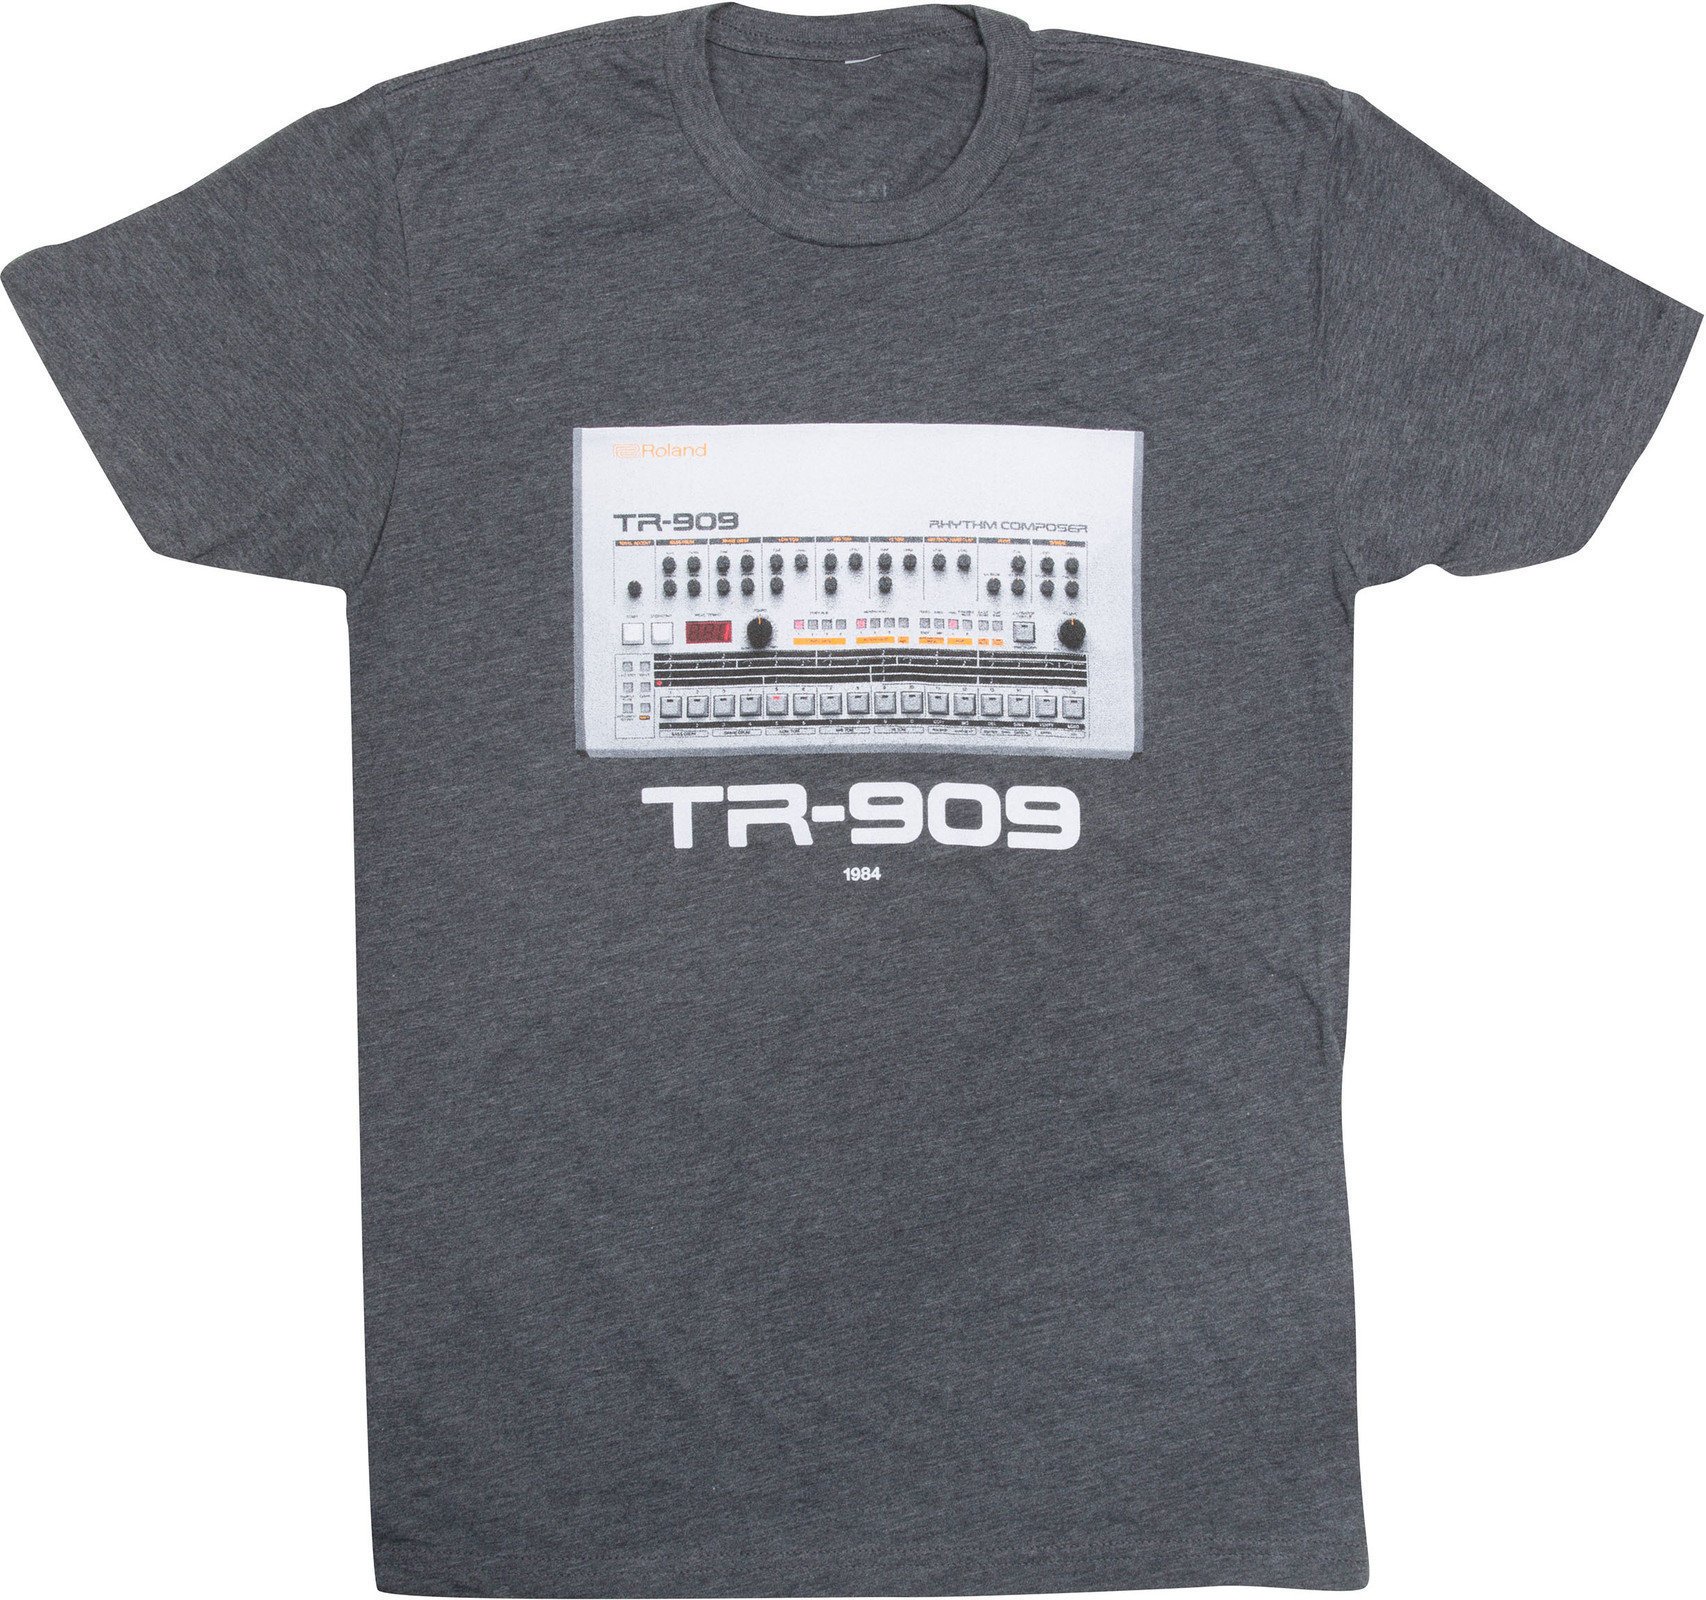 Ing Roland Ing TR-909 Charcoal L